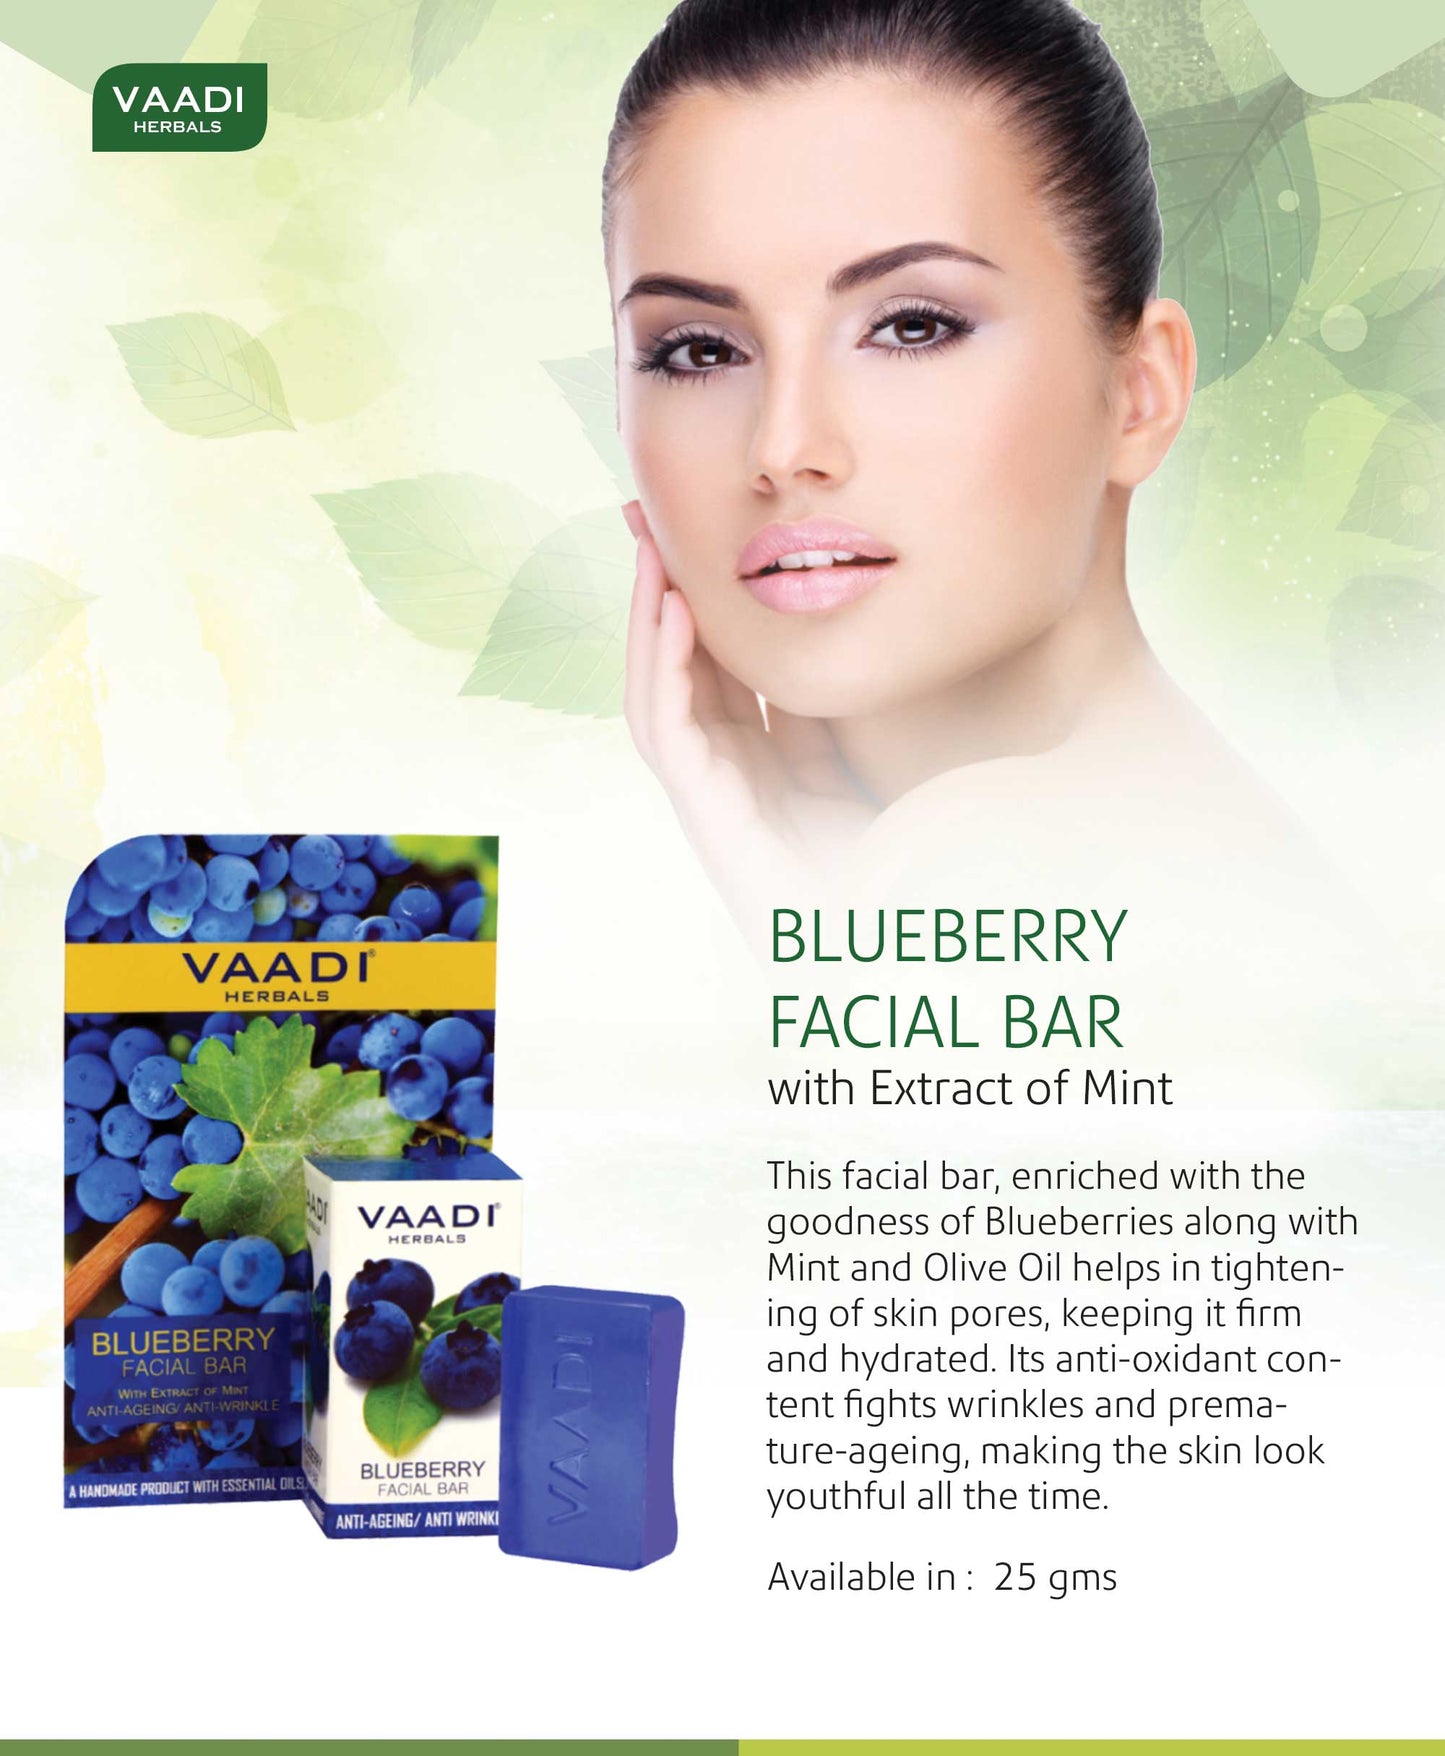 Organic Blueberry Facial Bar with Mint Extract & Olive Oil - Prevents Wrinkles (4 x 25 gms/0.9 oz)